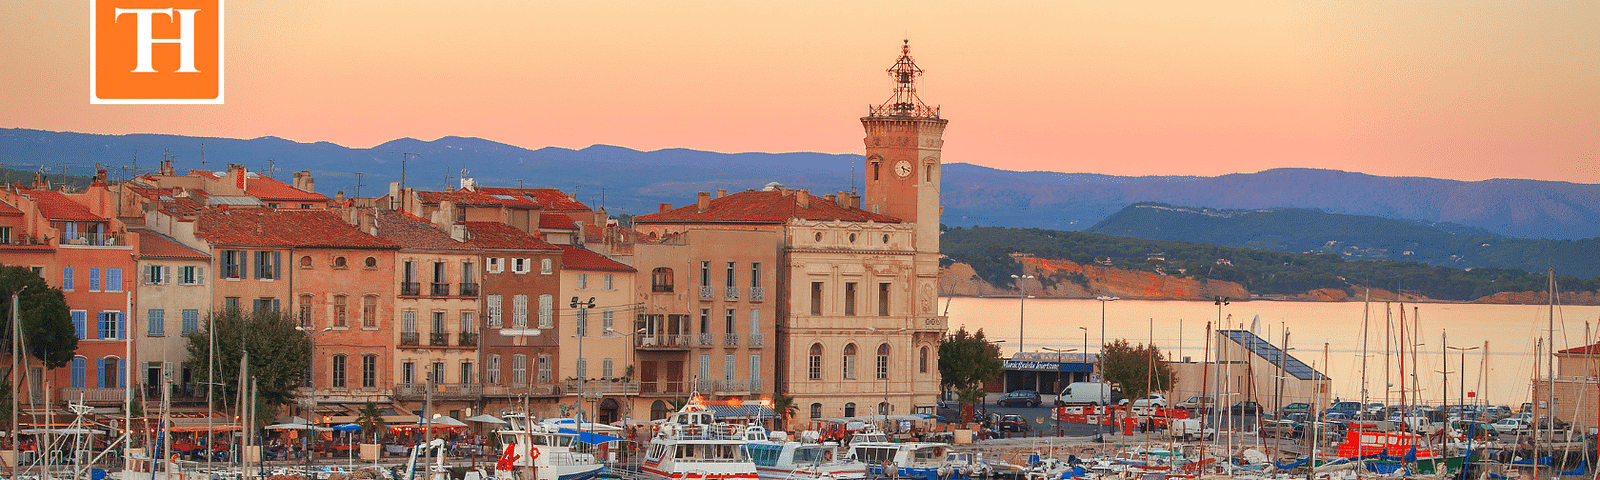 The Best Places to Explore in La Ciotat on the French Riviera in the Provence-Alpes-Côte d’Azur region in southern France.